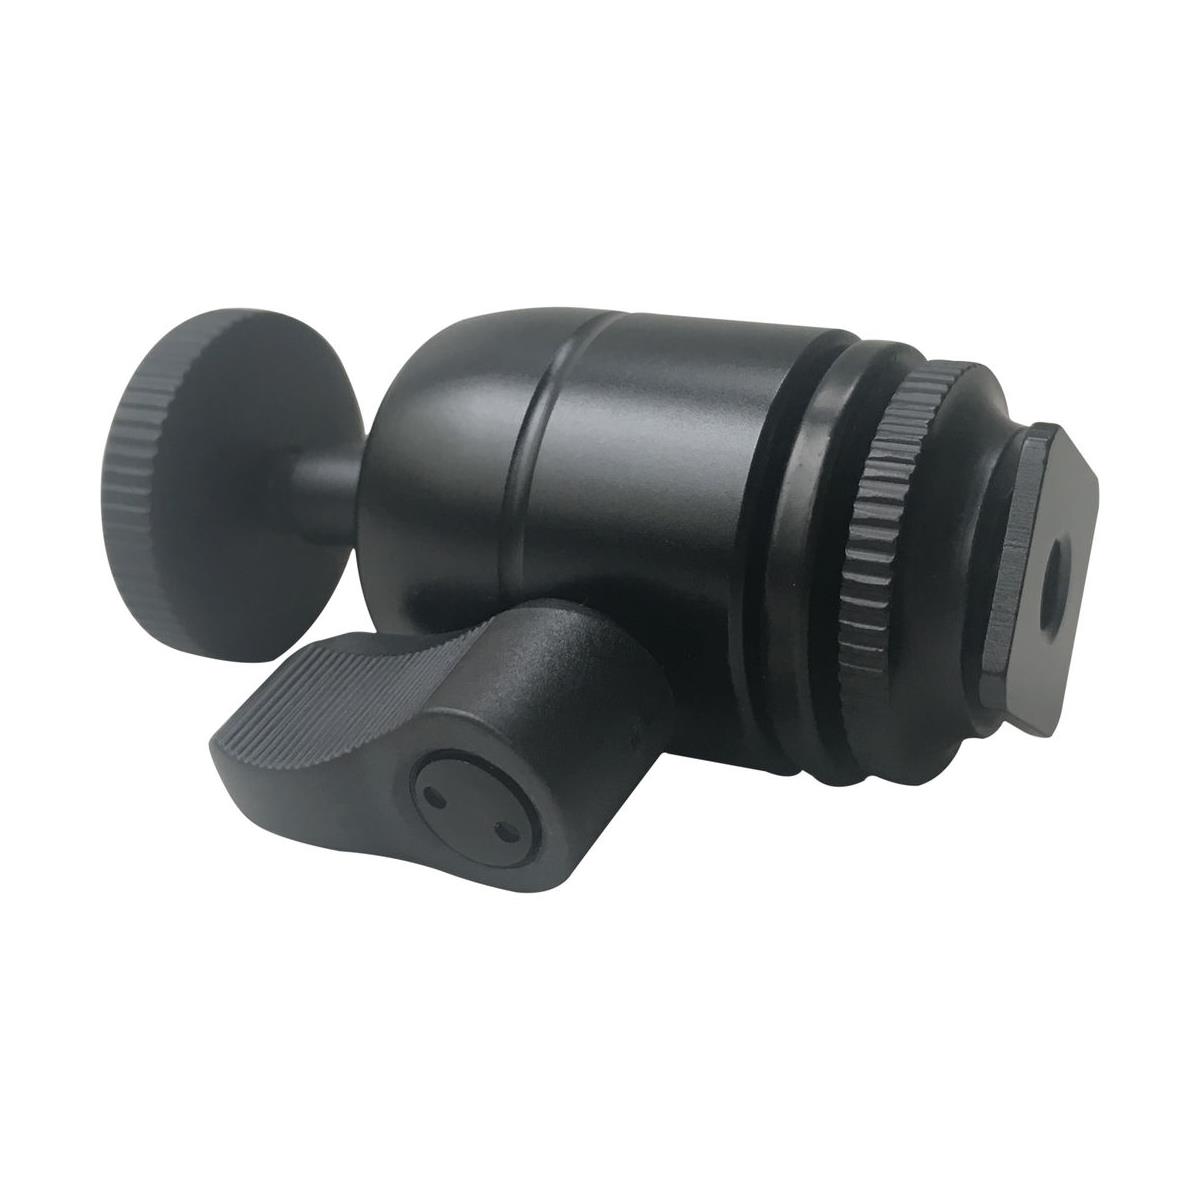 Litra Torch Cold Shoe Ball Mount